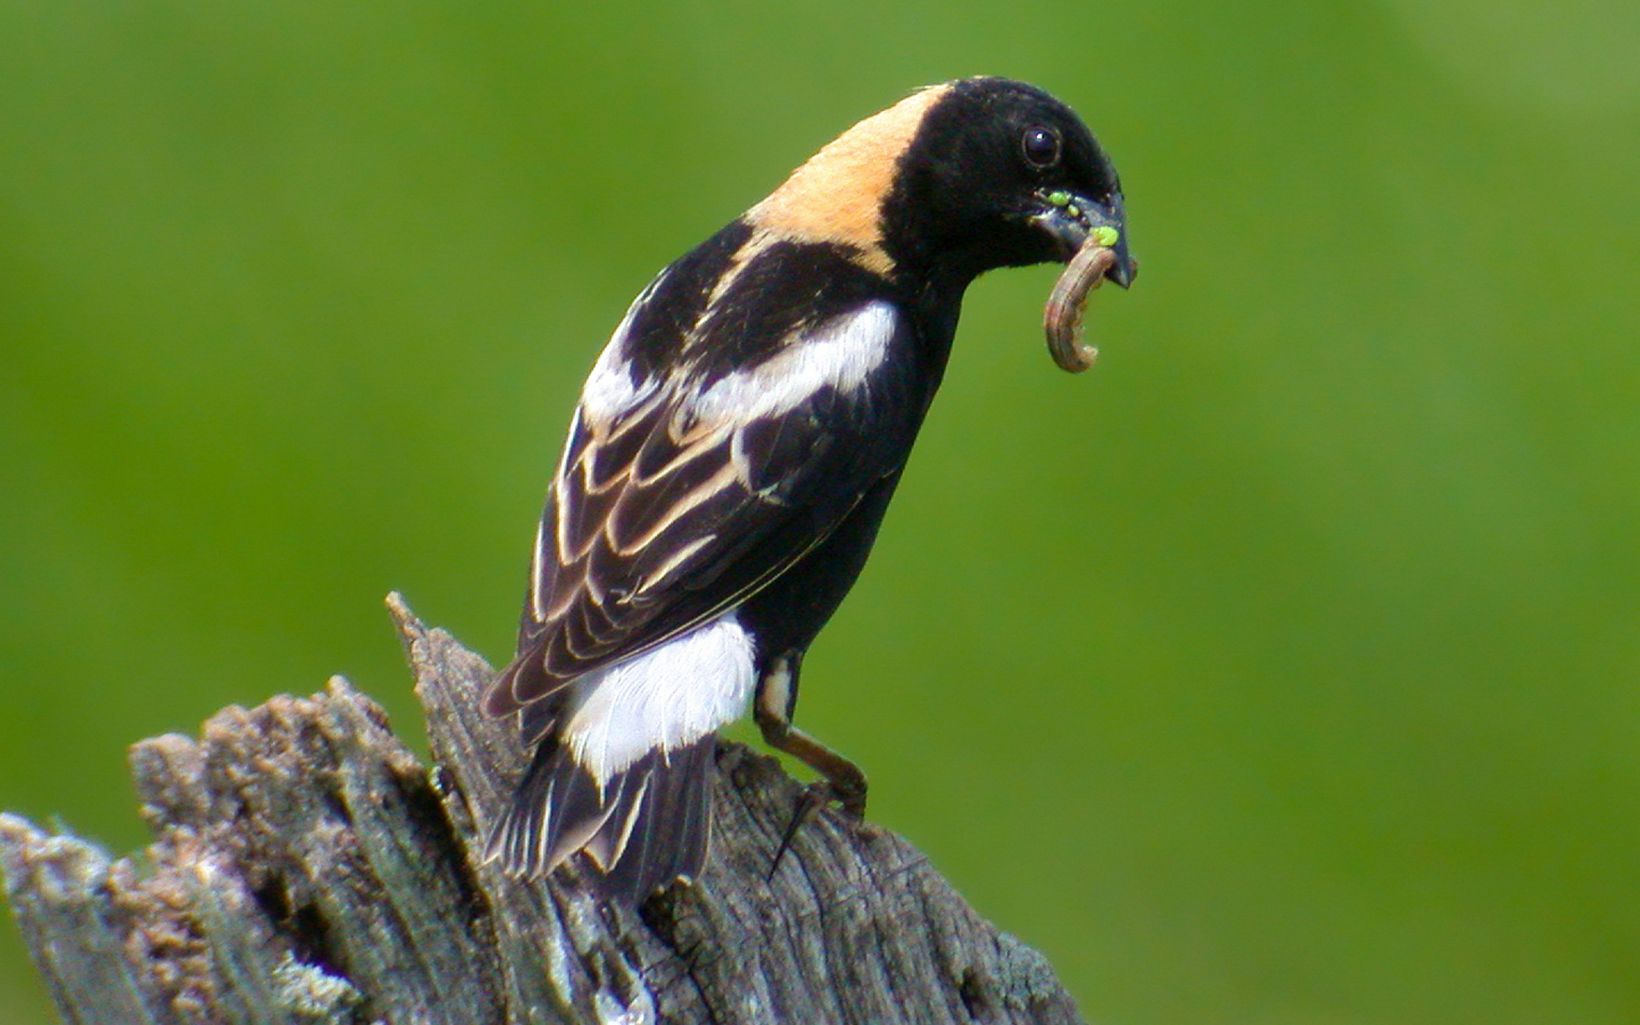 The bobolink is one of the world's most impressive songbird migrants, traveling some 12,500 miles to and from southern South America every year. 